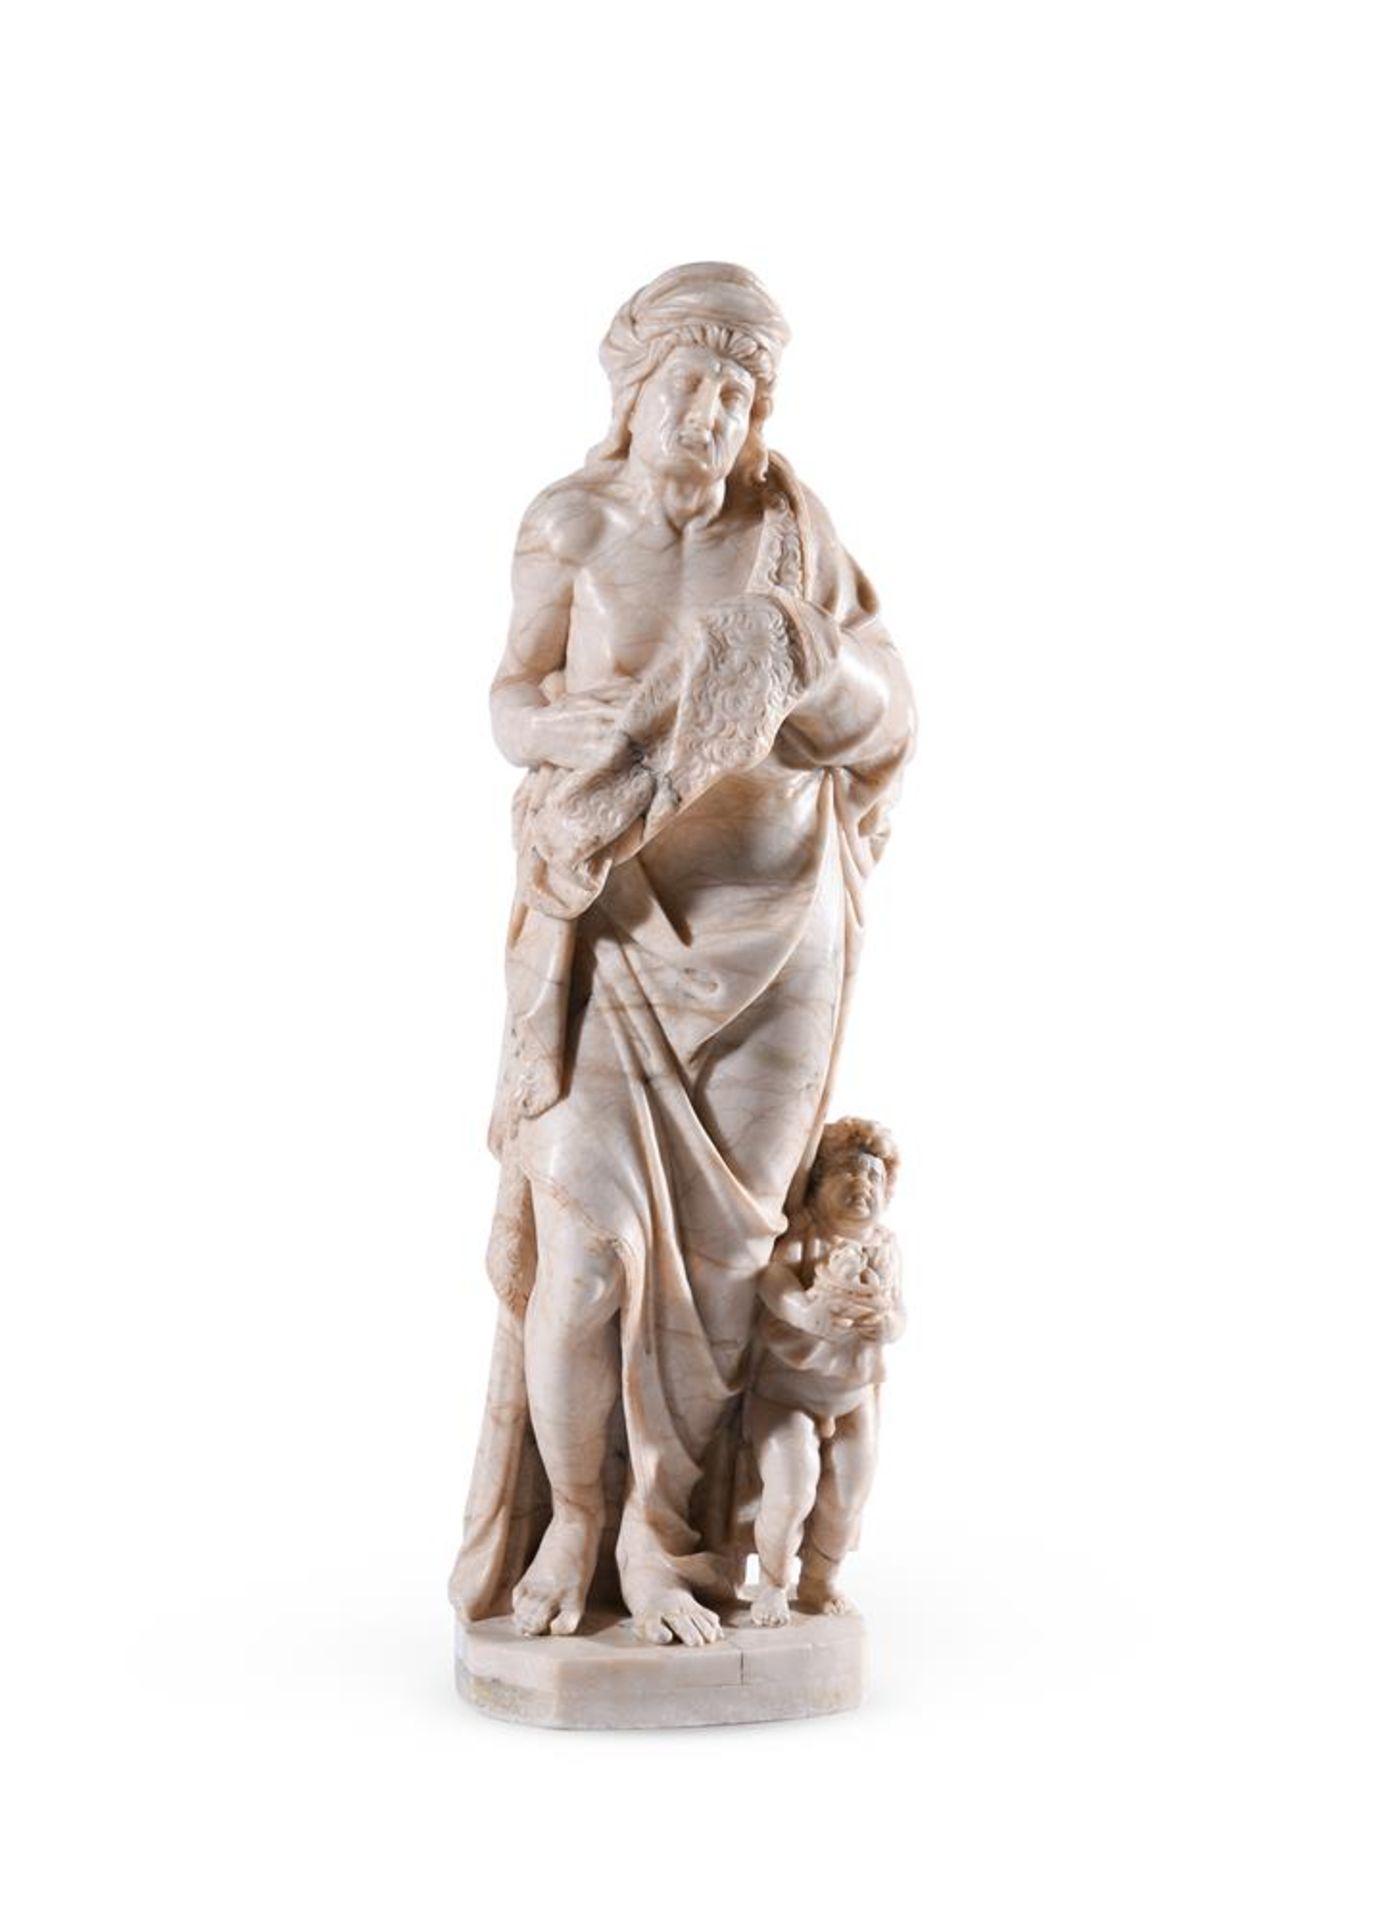 A GERMAN ALABASTER ALLEGORICAL FIGURE OF WINTER AS AN OLD MAN, 17TH CENTURY